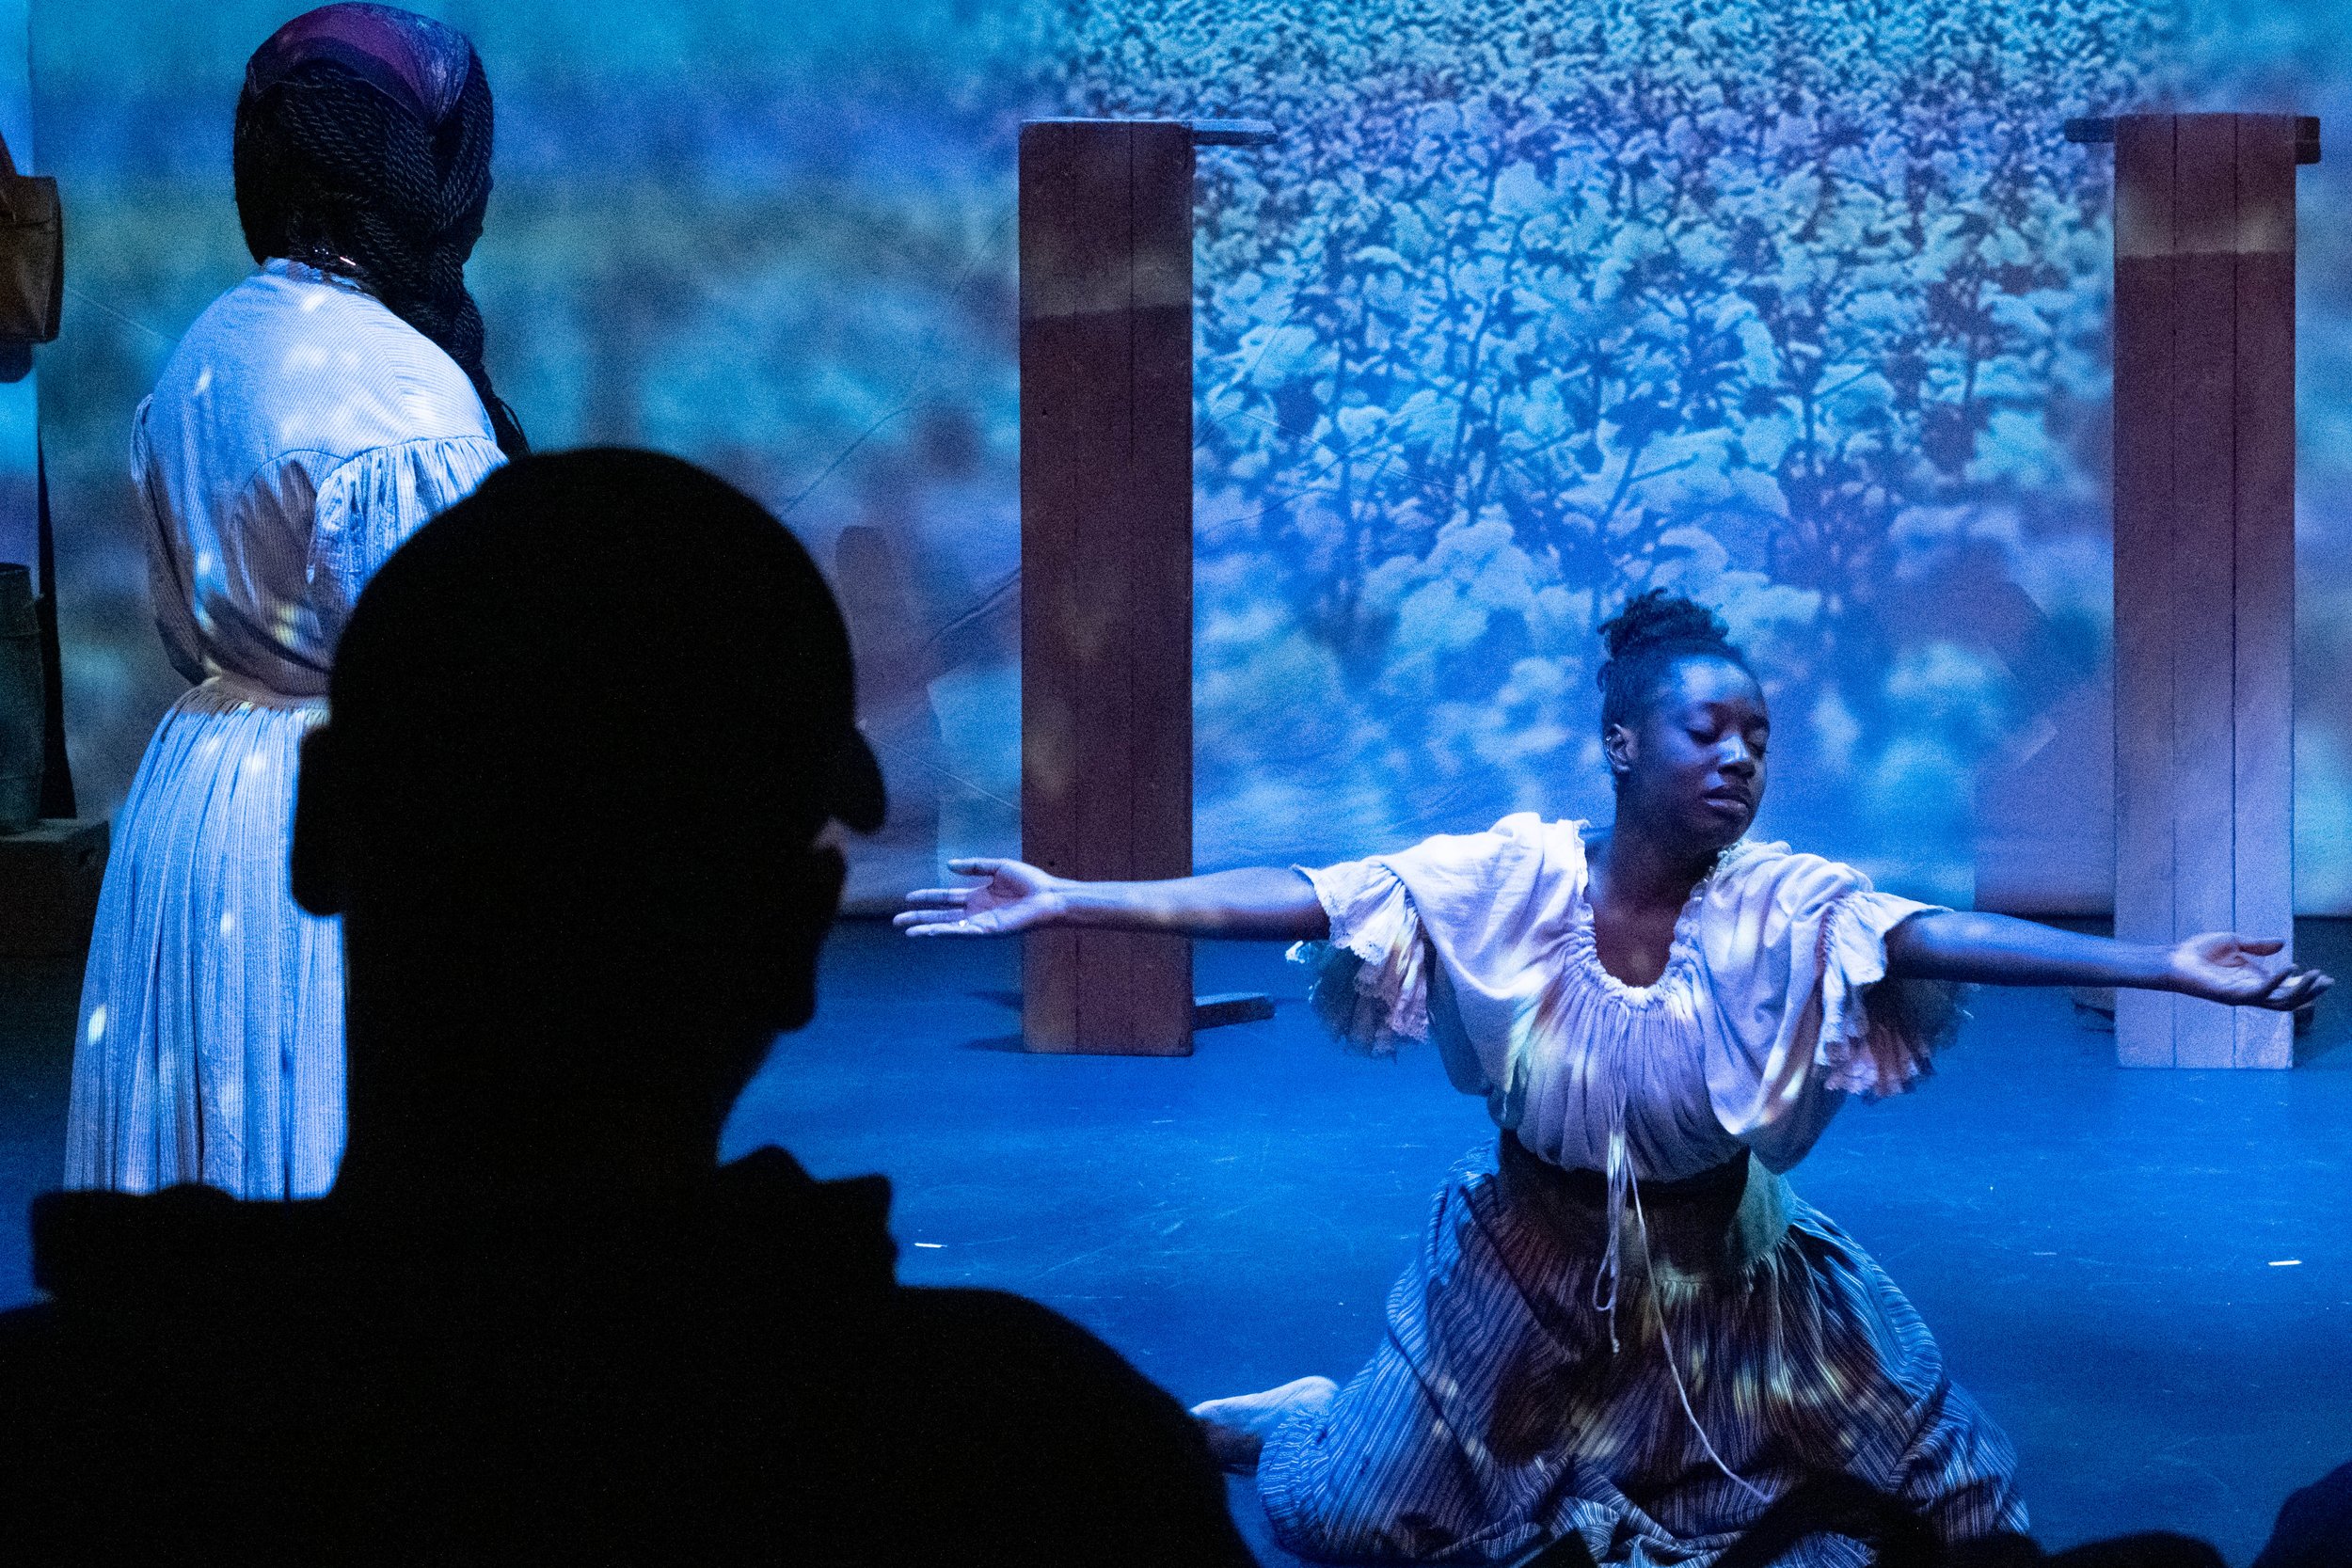  (L) Tia Jiji stands observing Raven Smith (R) perform a dance in front of a backdrop depicting cotton fields on Tuesday Oct. 17th, 2023 in Santa Monica, Calif. at the Santa Monica Colllege Studio Stage during the play "By The River Rivanna". The sil